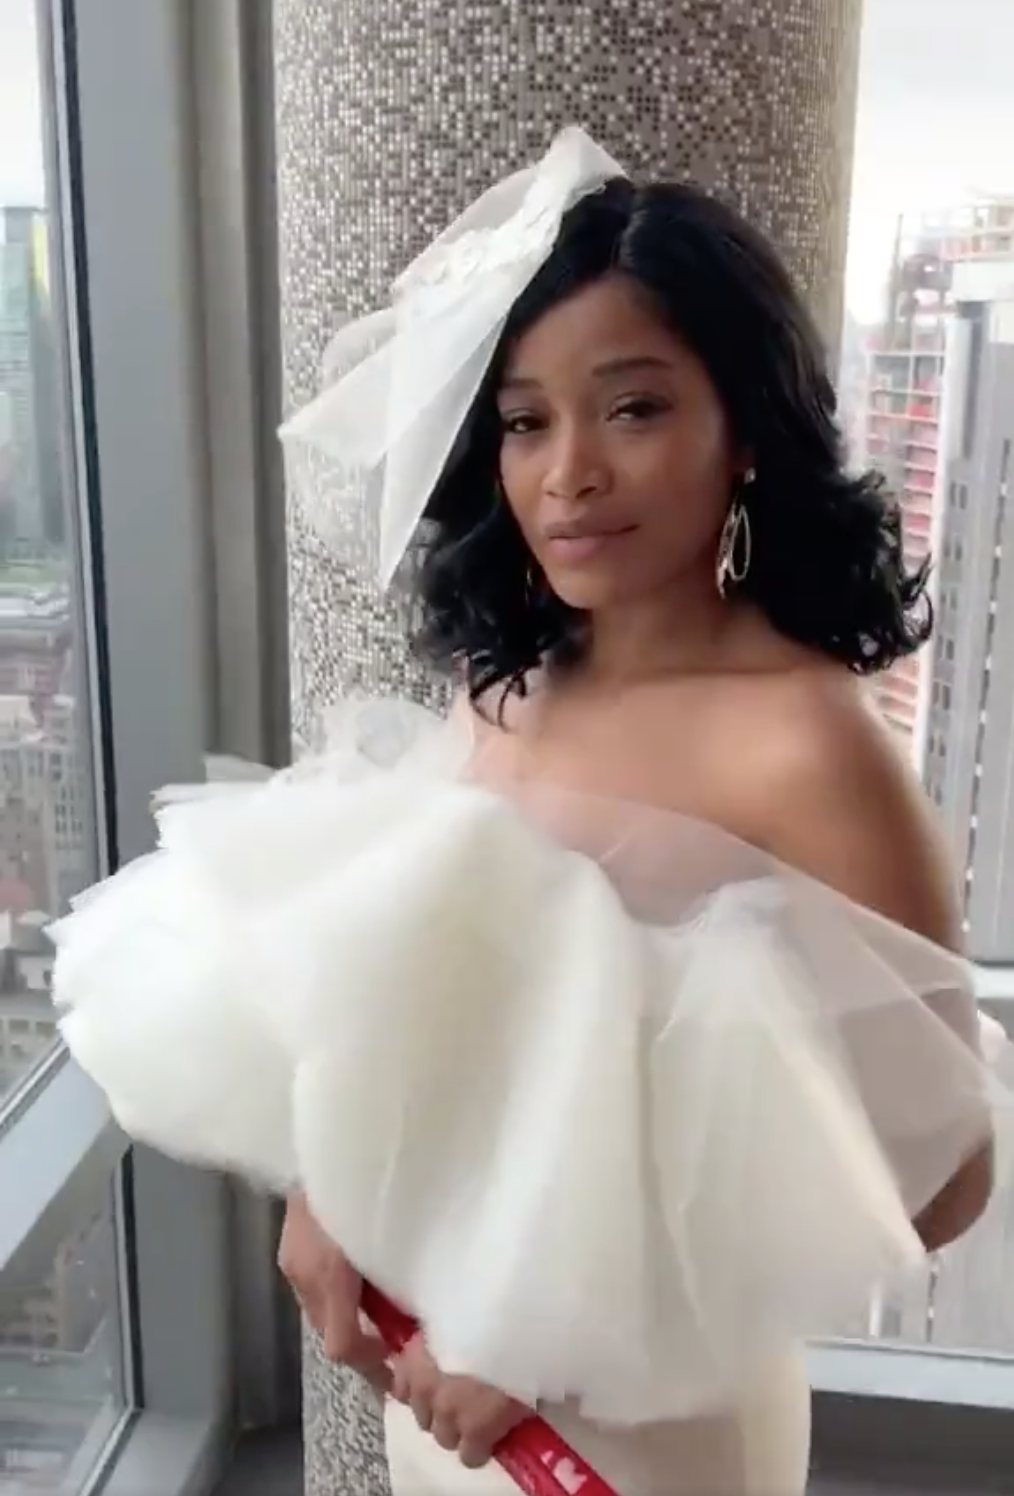 Keke poses in a dramatic designer gown as &quot;Lady Miss&quot;